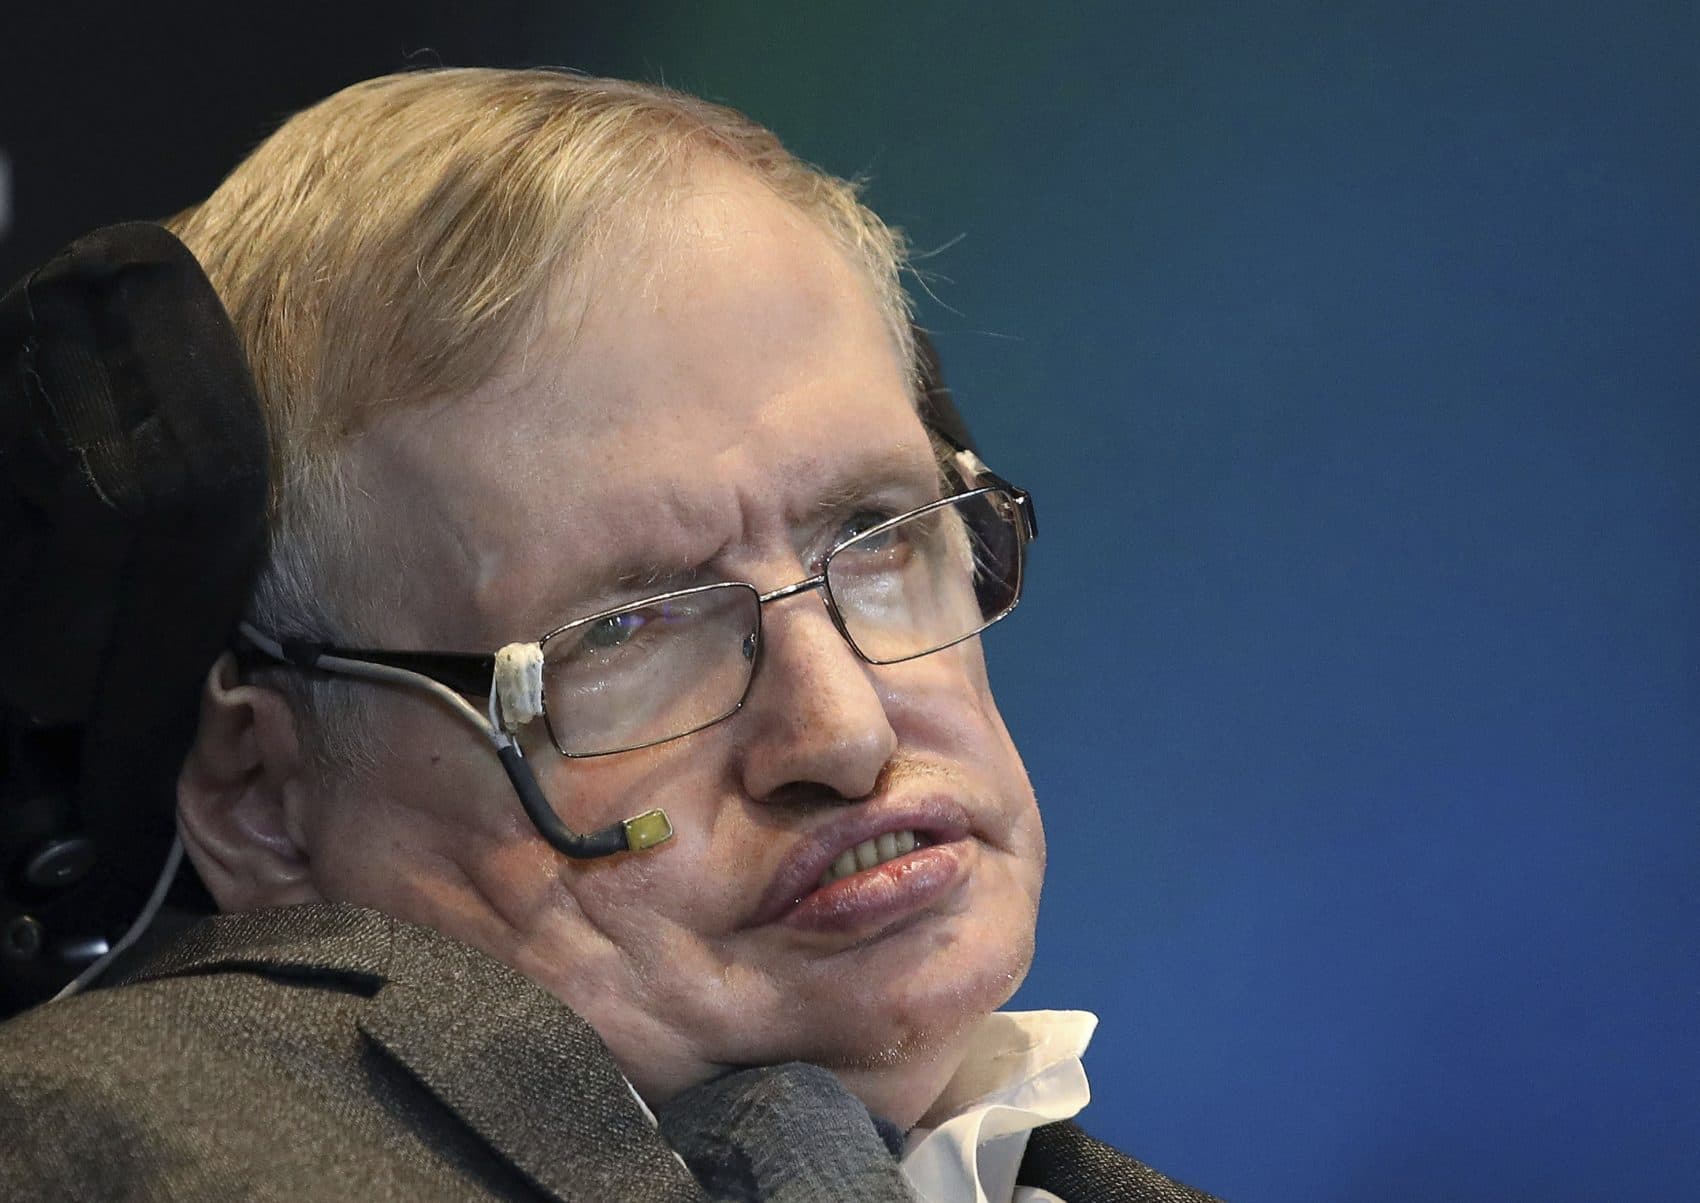 Stephen Hawking's Death 'A Loss For All Of Us,' Friend And Fellow